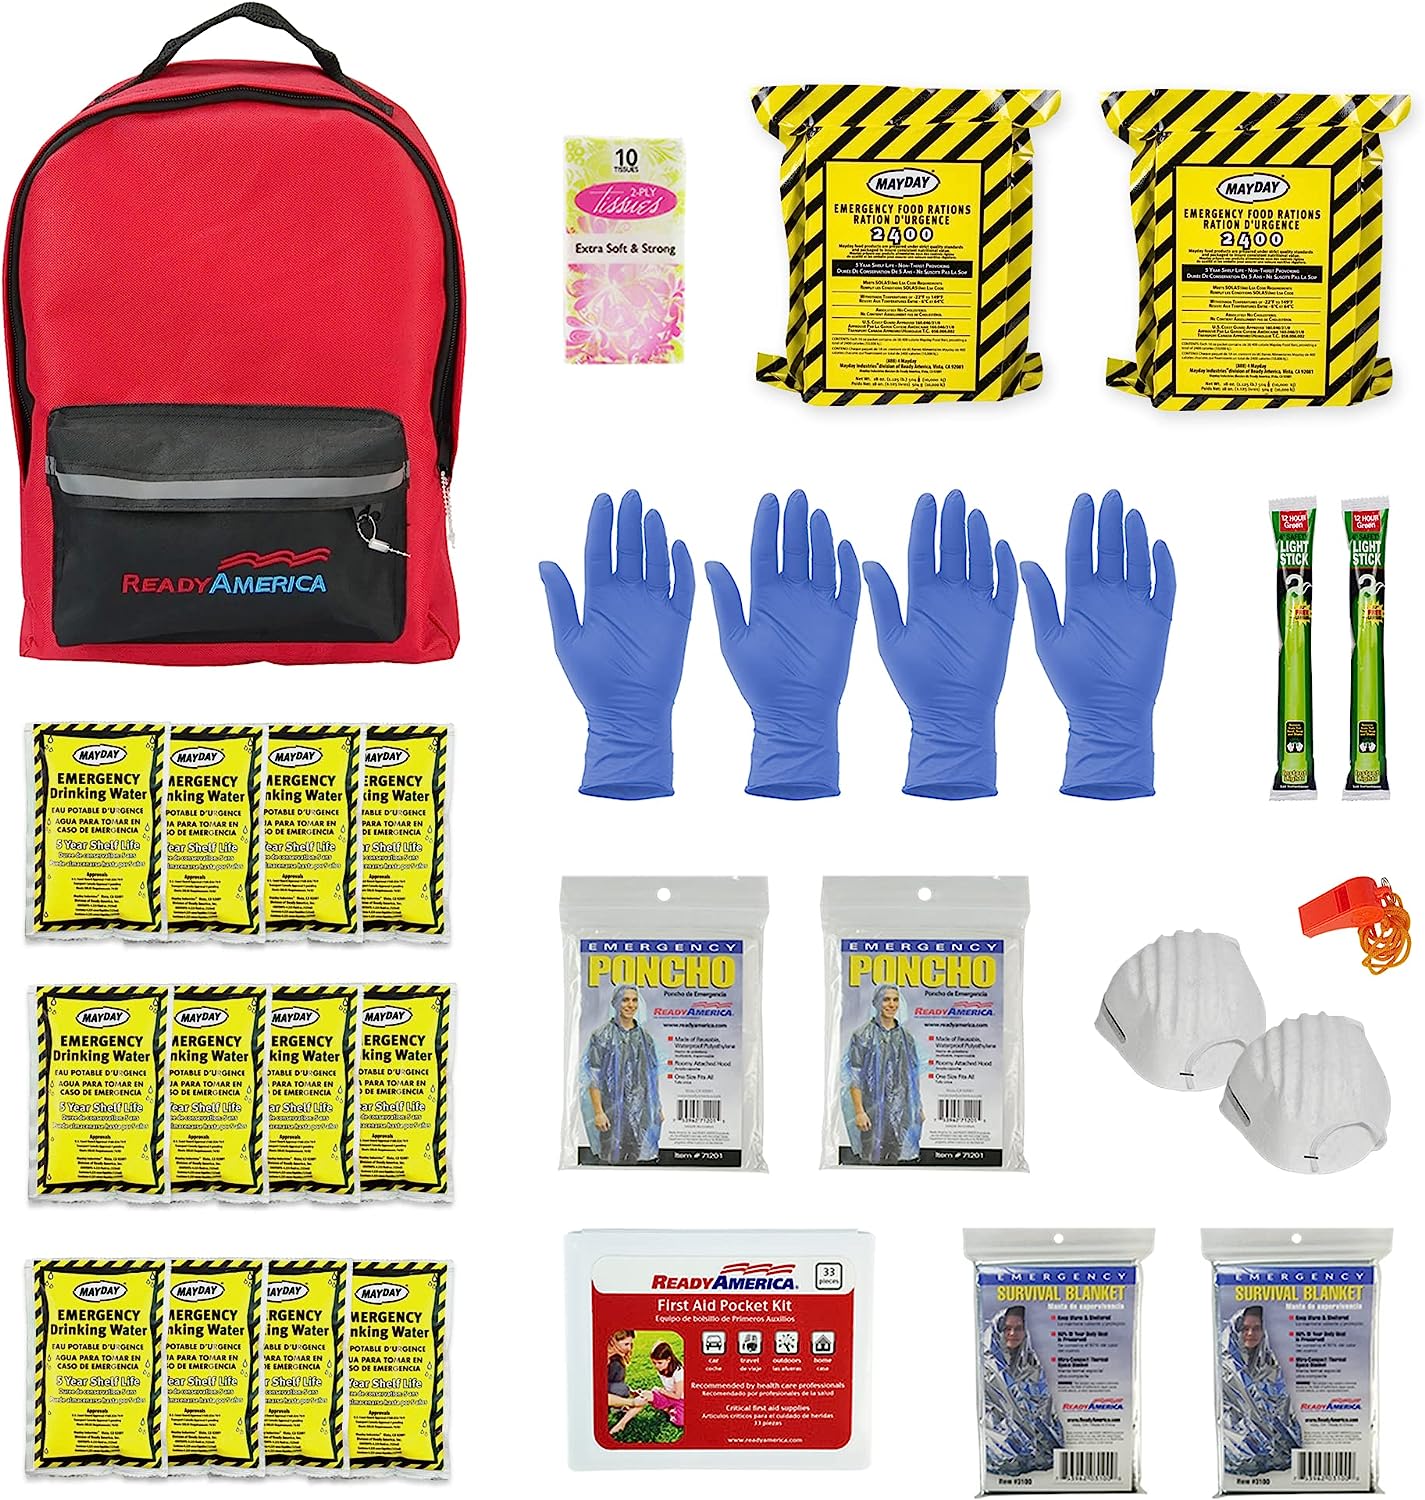 earthquake survival kit detailed review